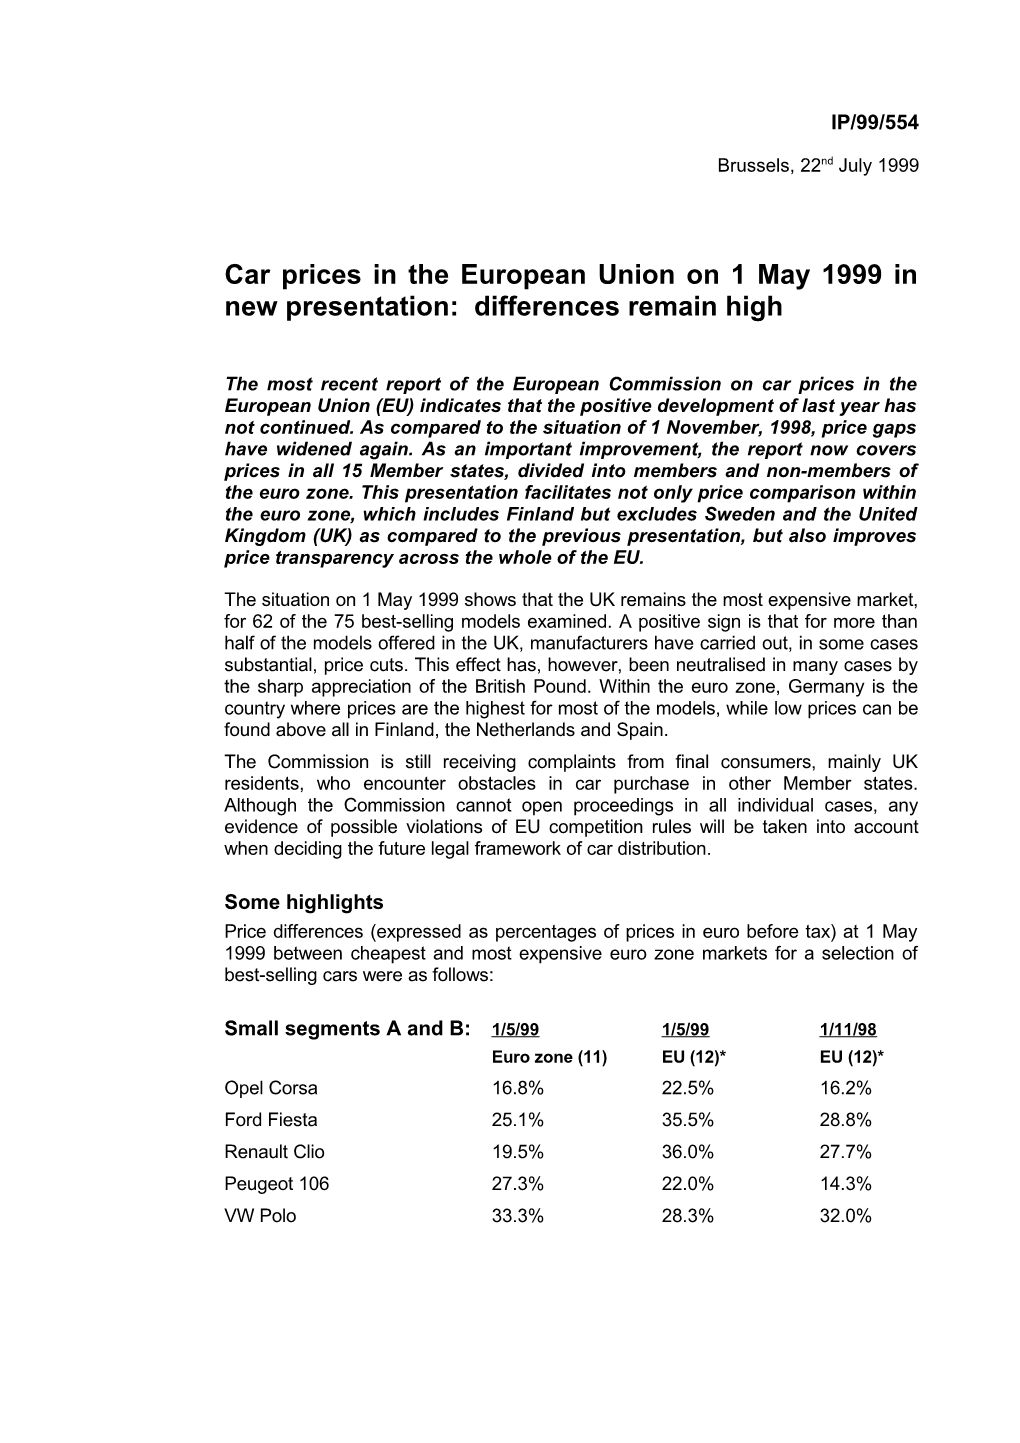 Car Prices in the European Union on 1 May 1999 in New Presentation: Differences Remain High